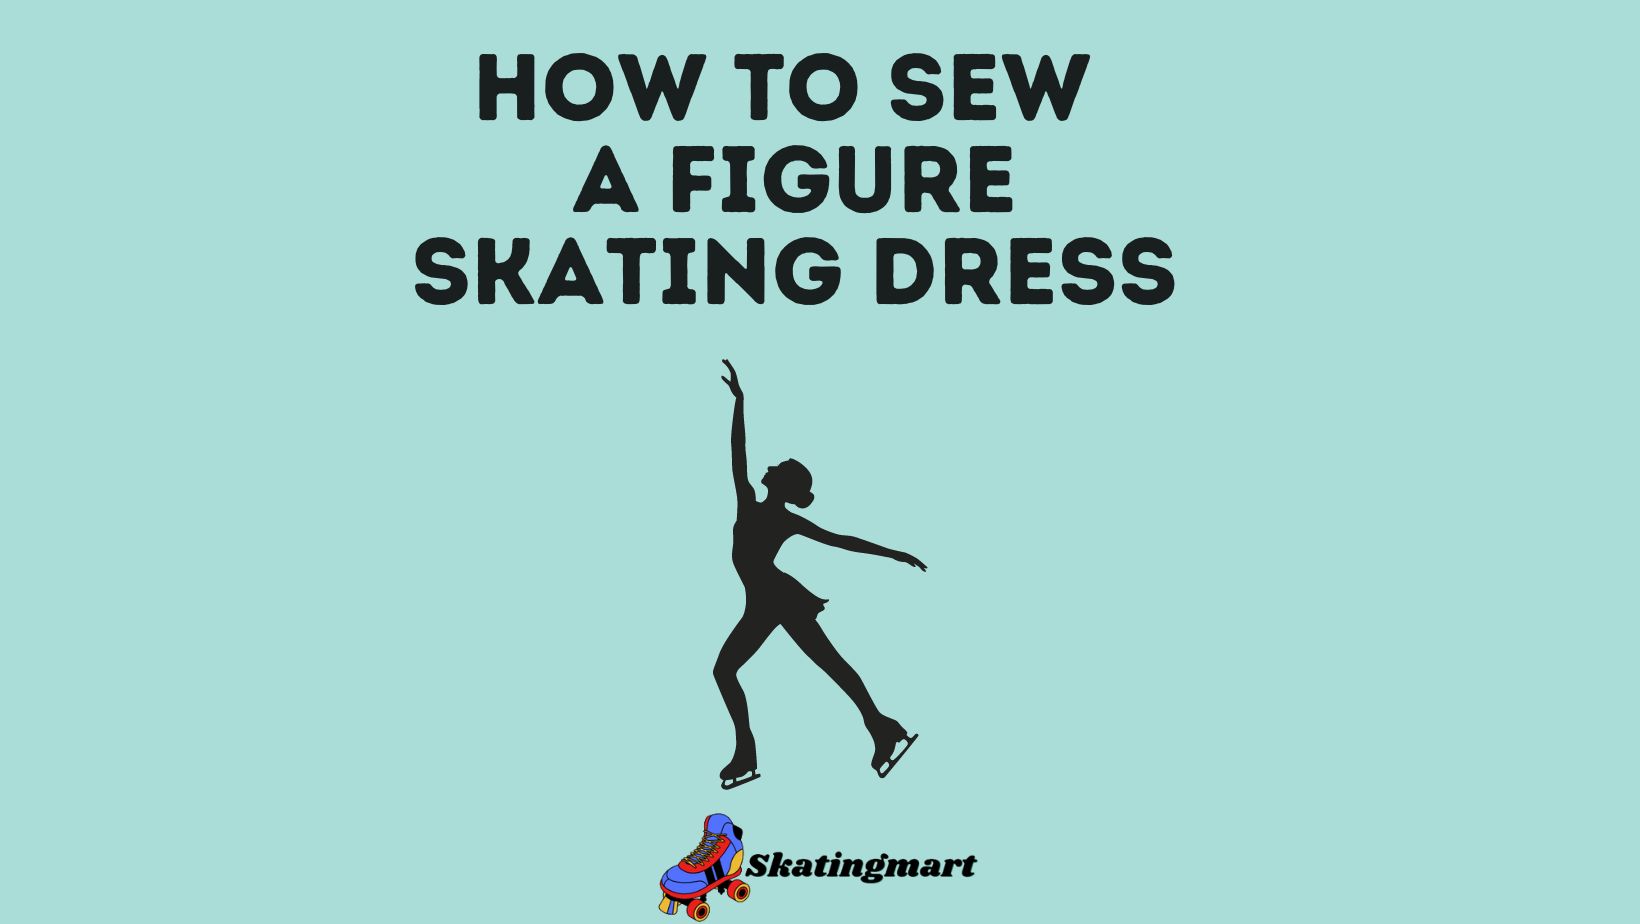 How to Sew a Figure Skating Dress